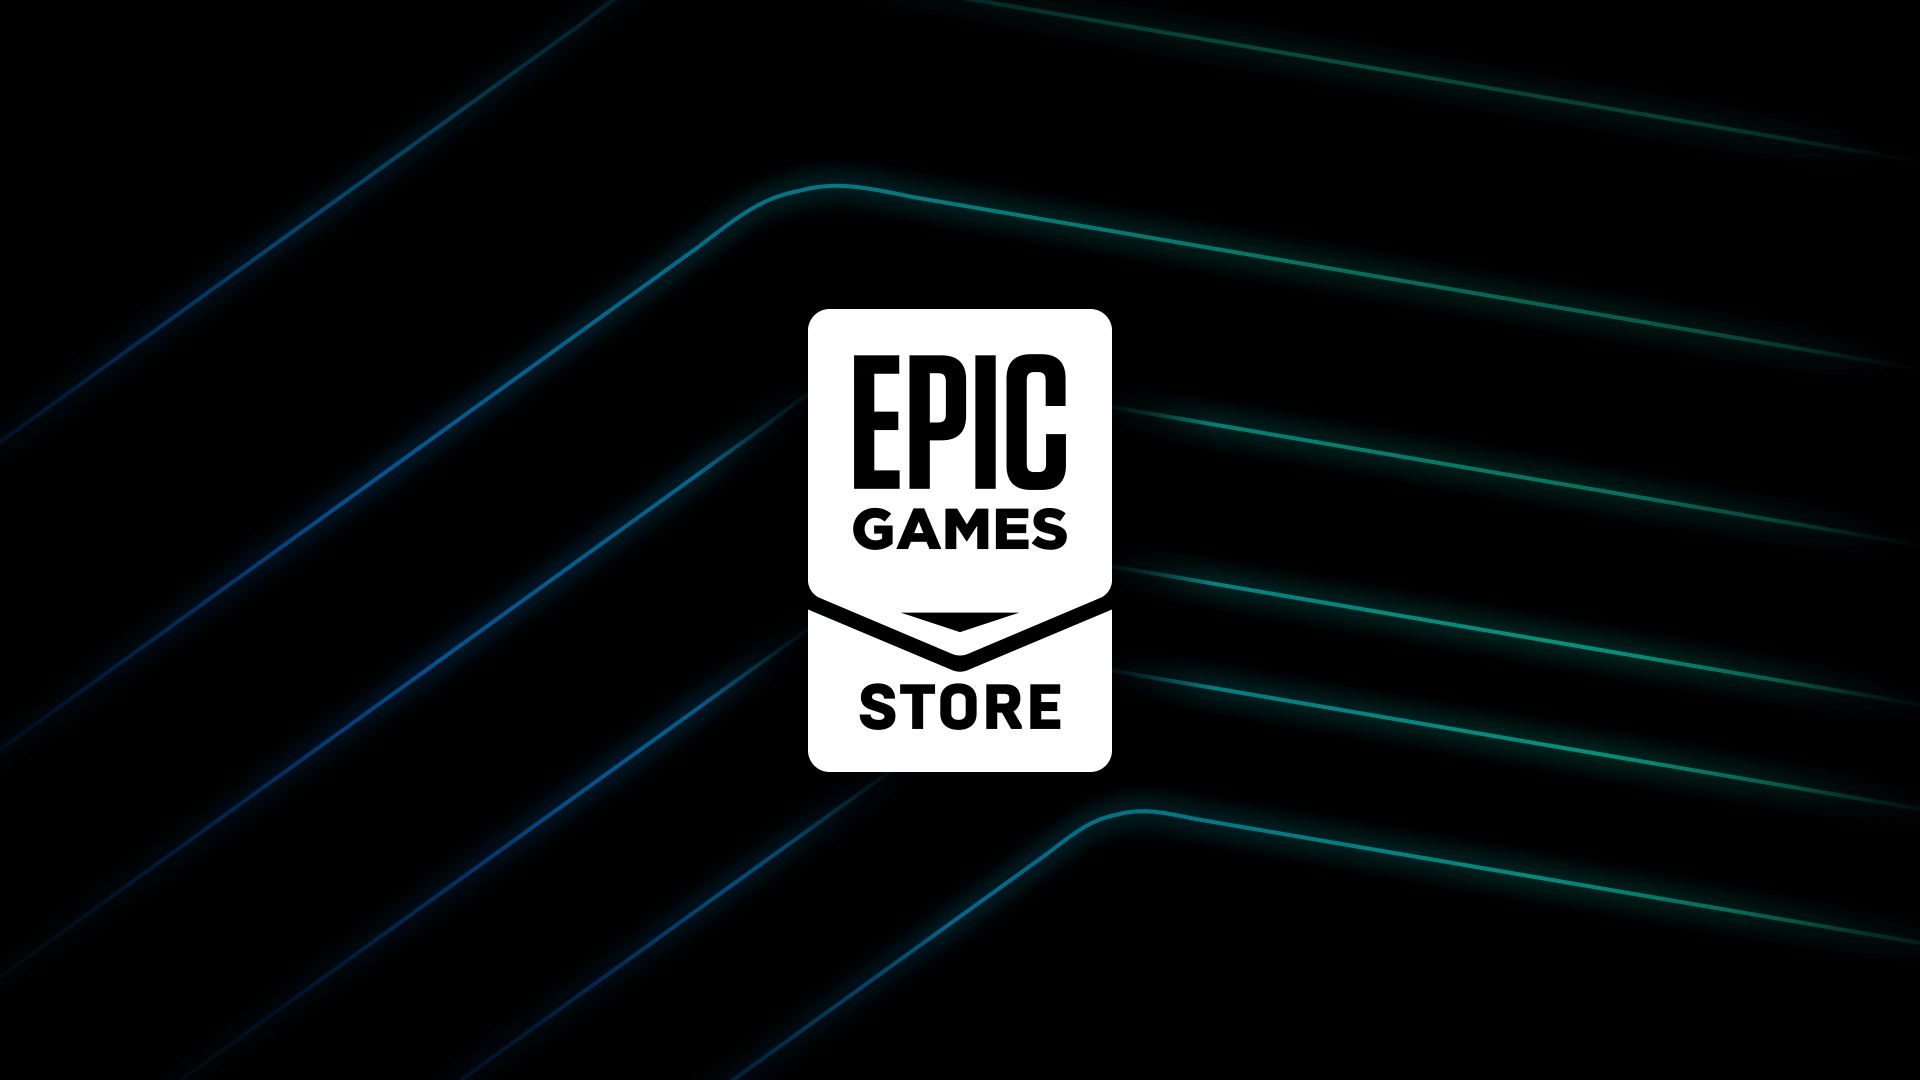 Epic Games sign in not working